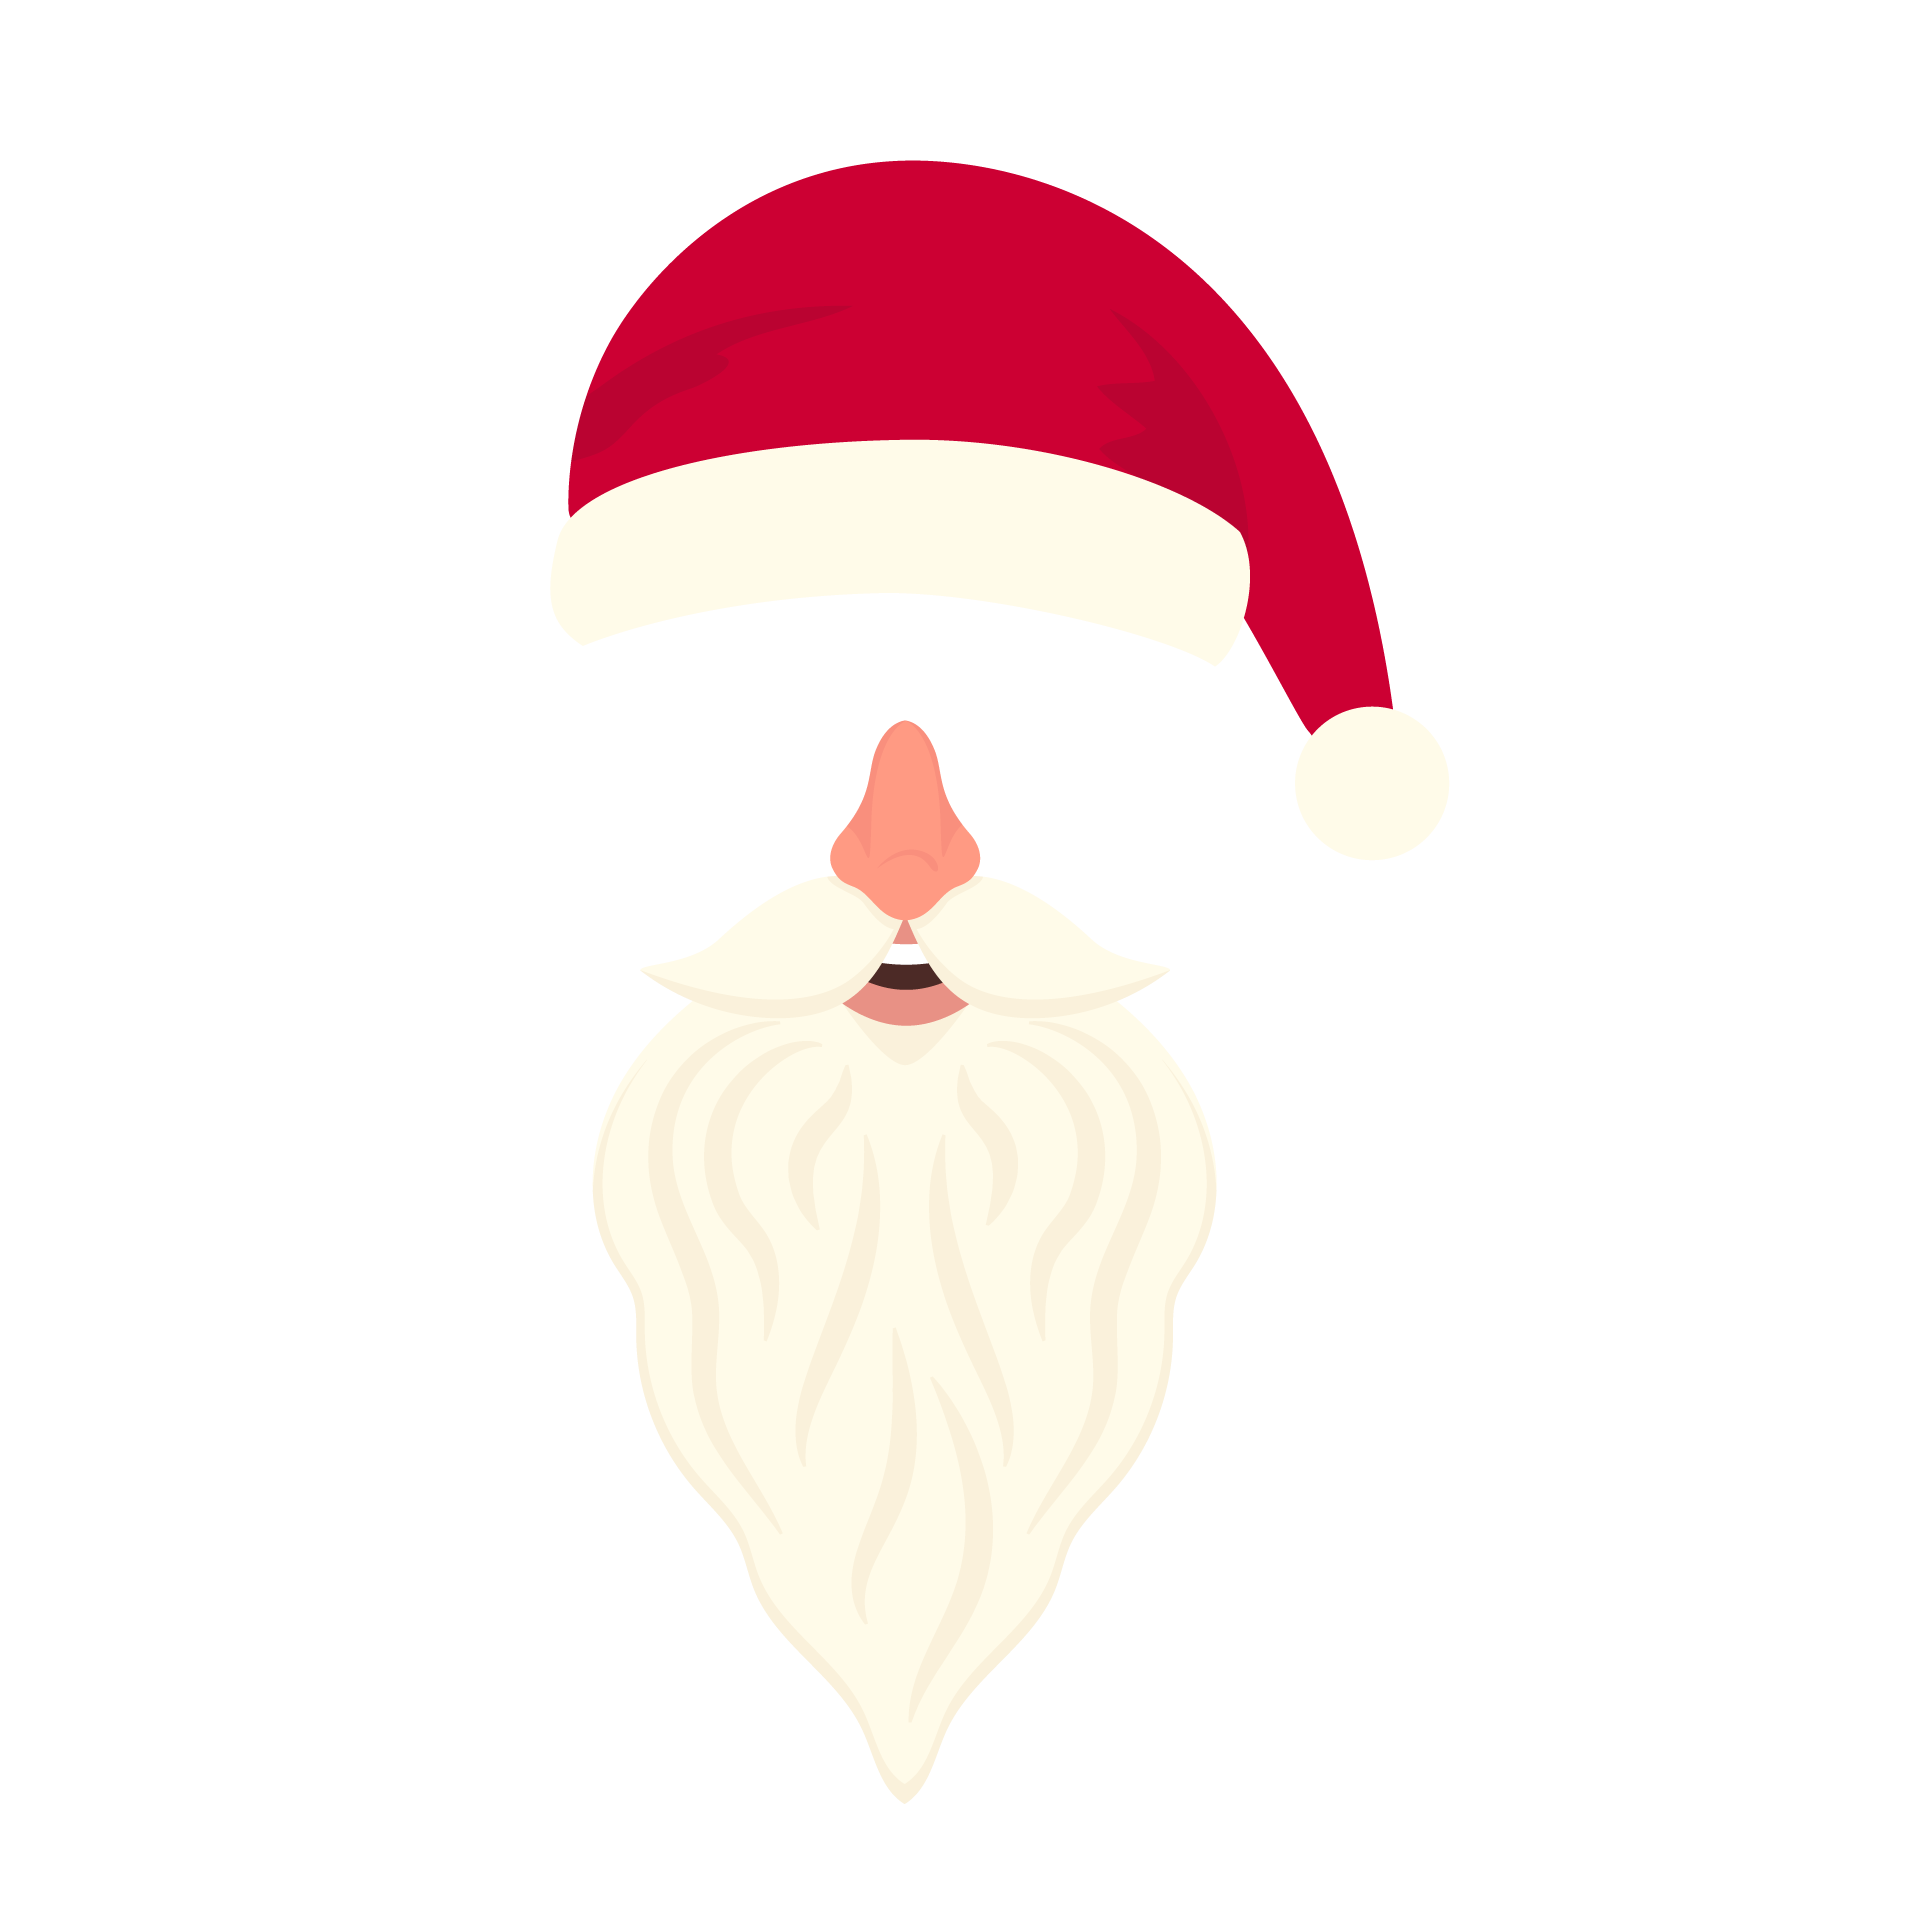 Different santas hats with nose funny white beards excellent image